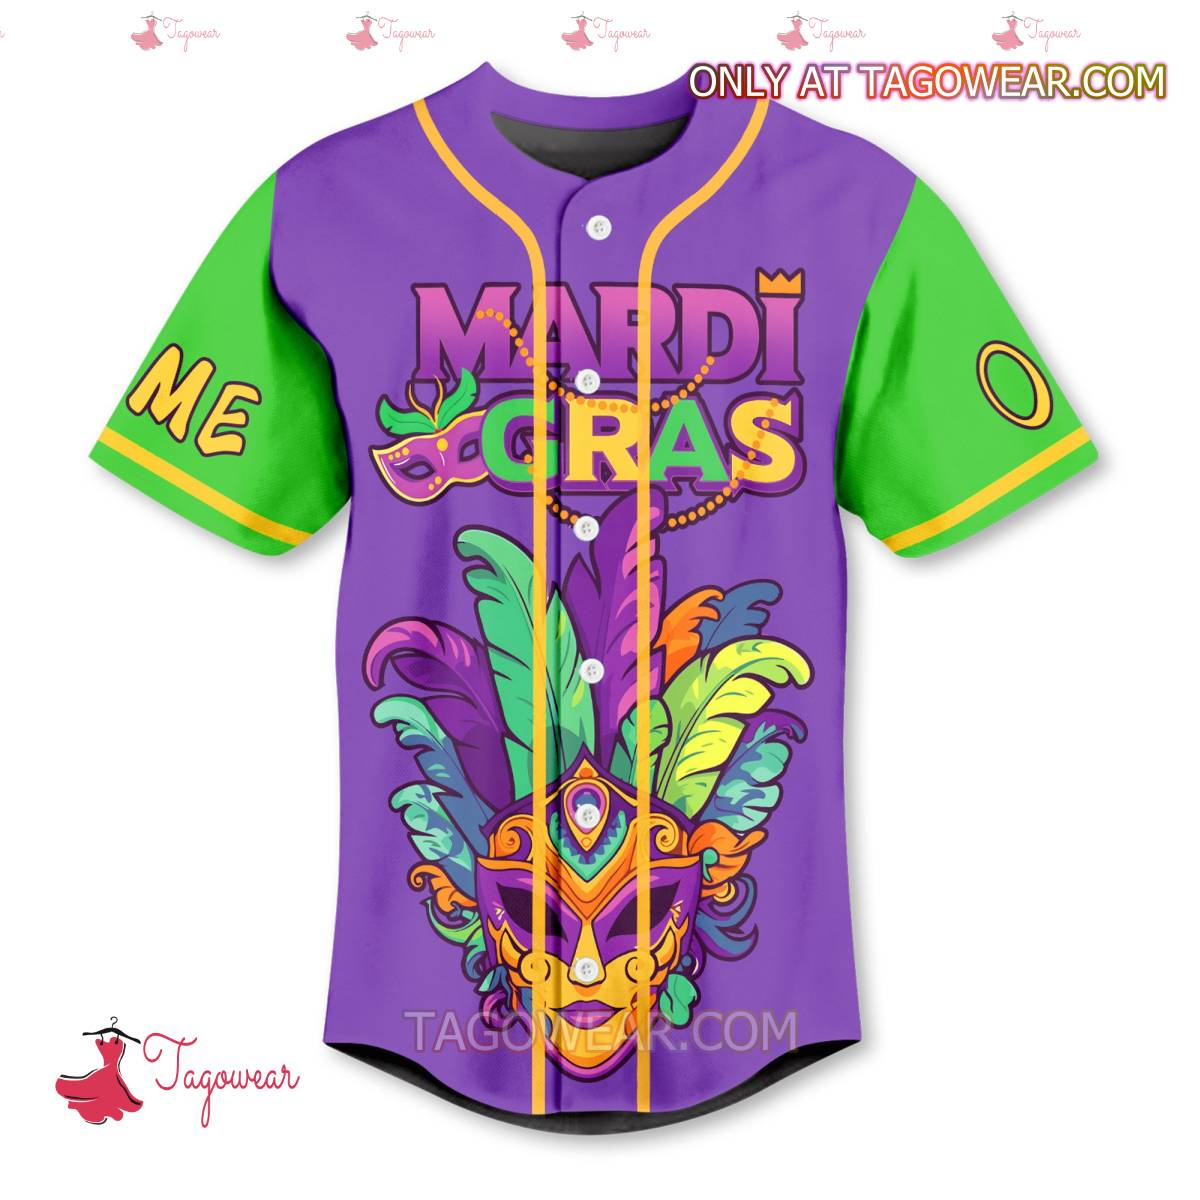 It's Mardi Gras Y'all Personalized Baseball Jersey a